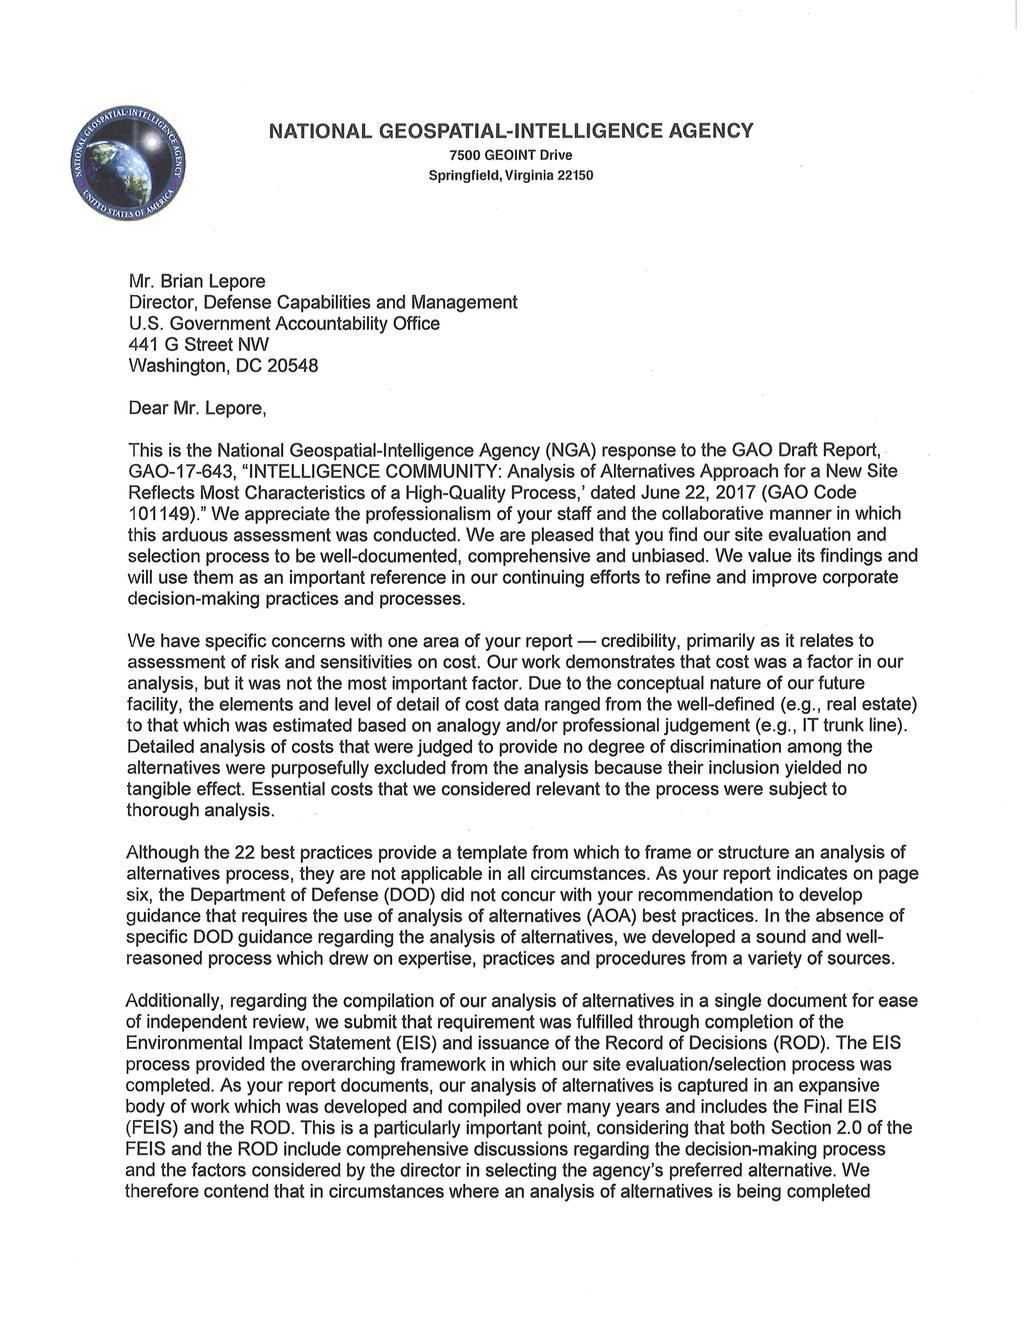 Appendix II: Comments from the National Geospatial-Intelligence Agency